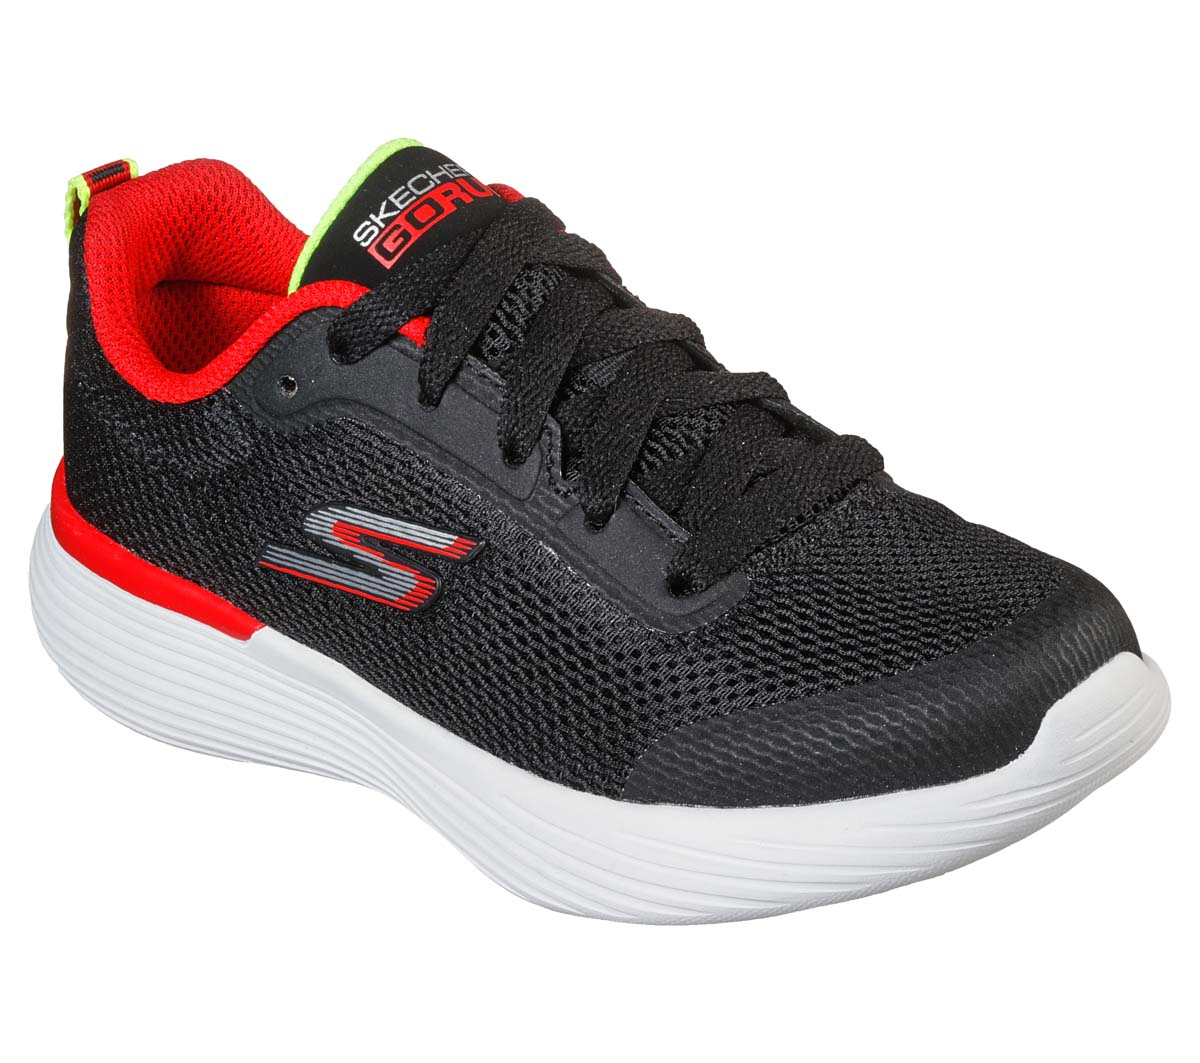 Skechers Go Run 400 Lace Black Red Kids Trainers 405100L In Size 37 In Plain Black Red For kids